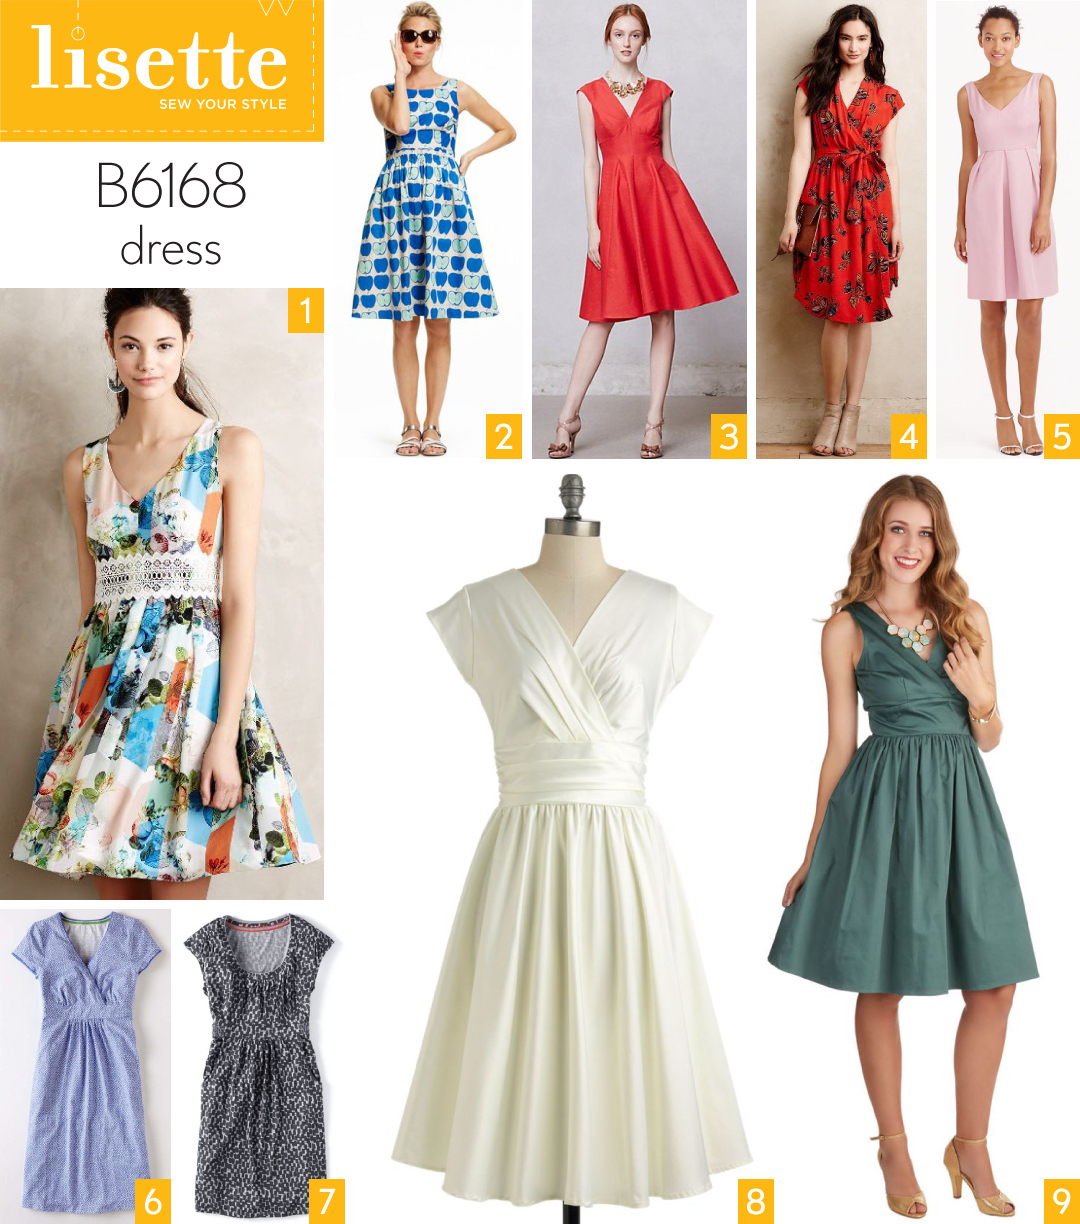 Style and Fabric Inspiration: Lisette B6168 Dress | Blog | Oliver + S